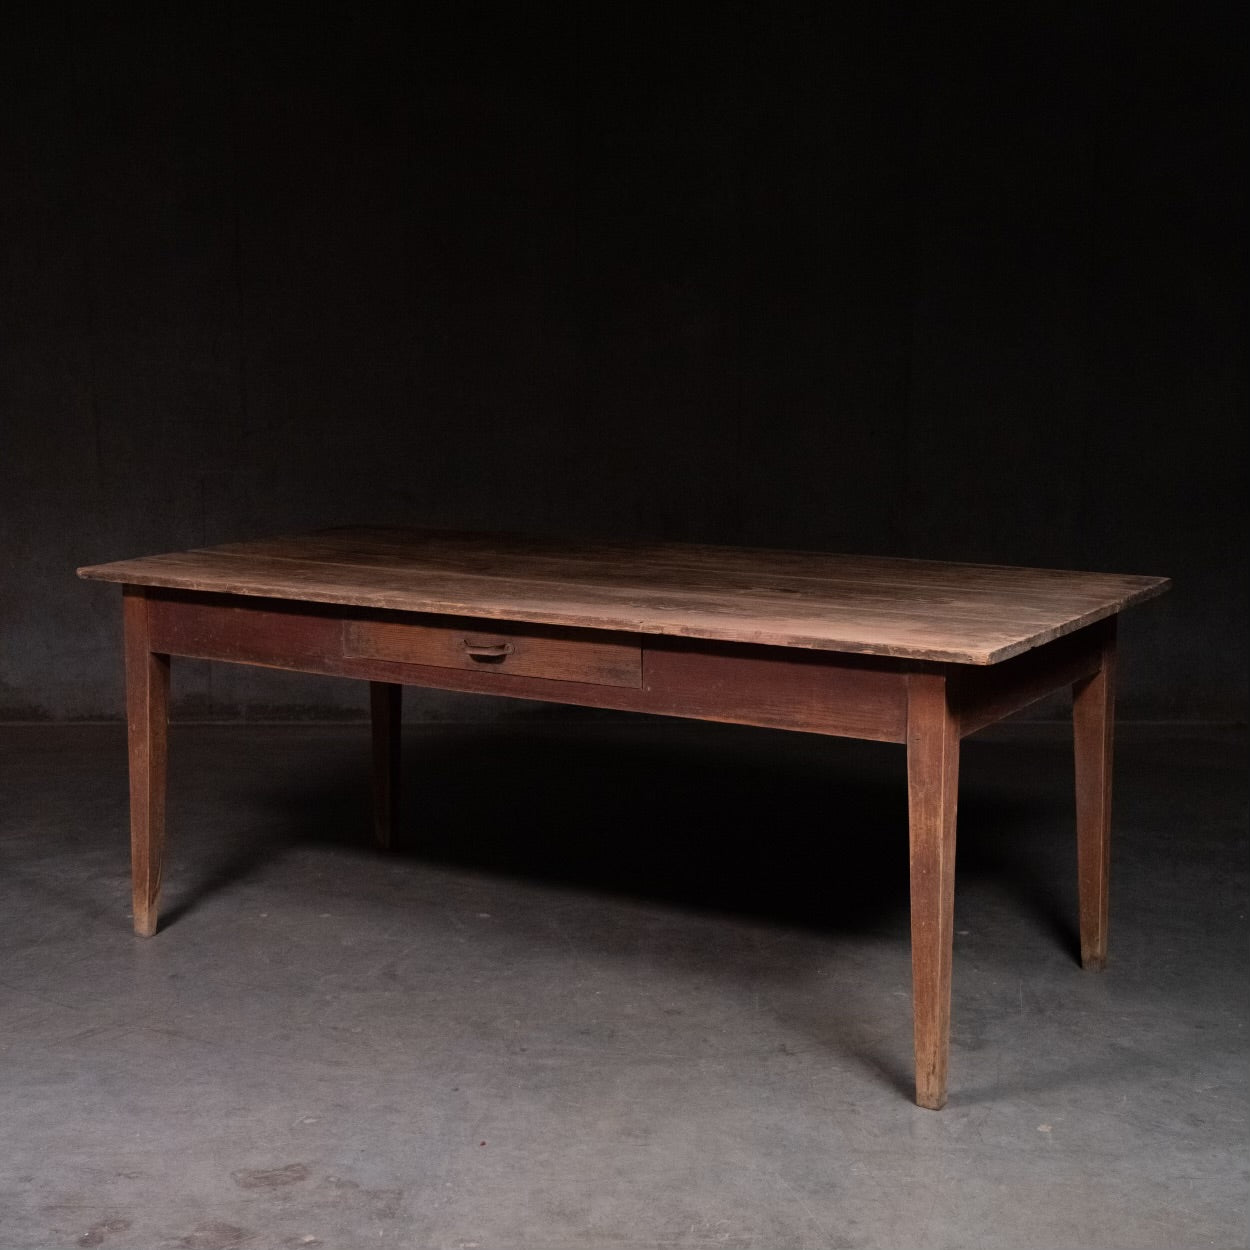 1880 pine country farm table